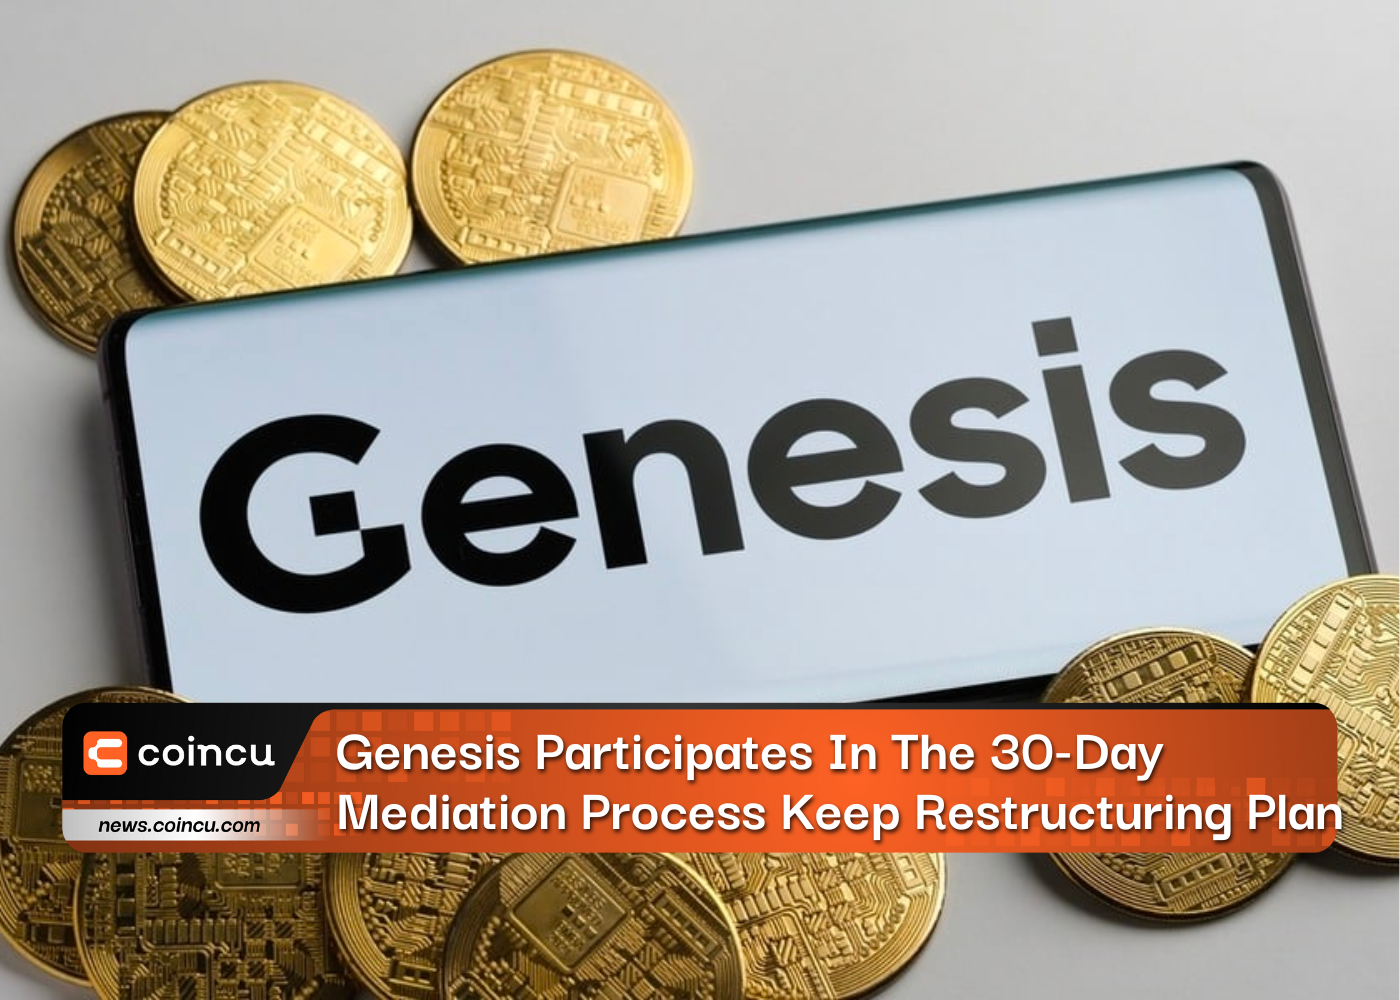 Genesis Participates In The 30-Day Mediation Process Keep Restructuring Plan